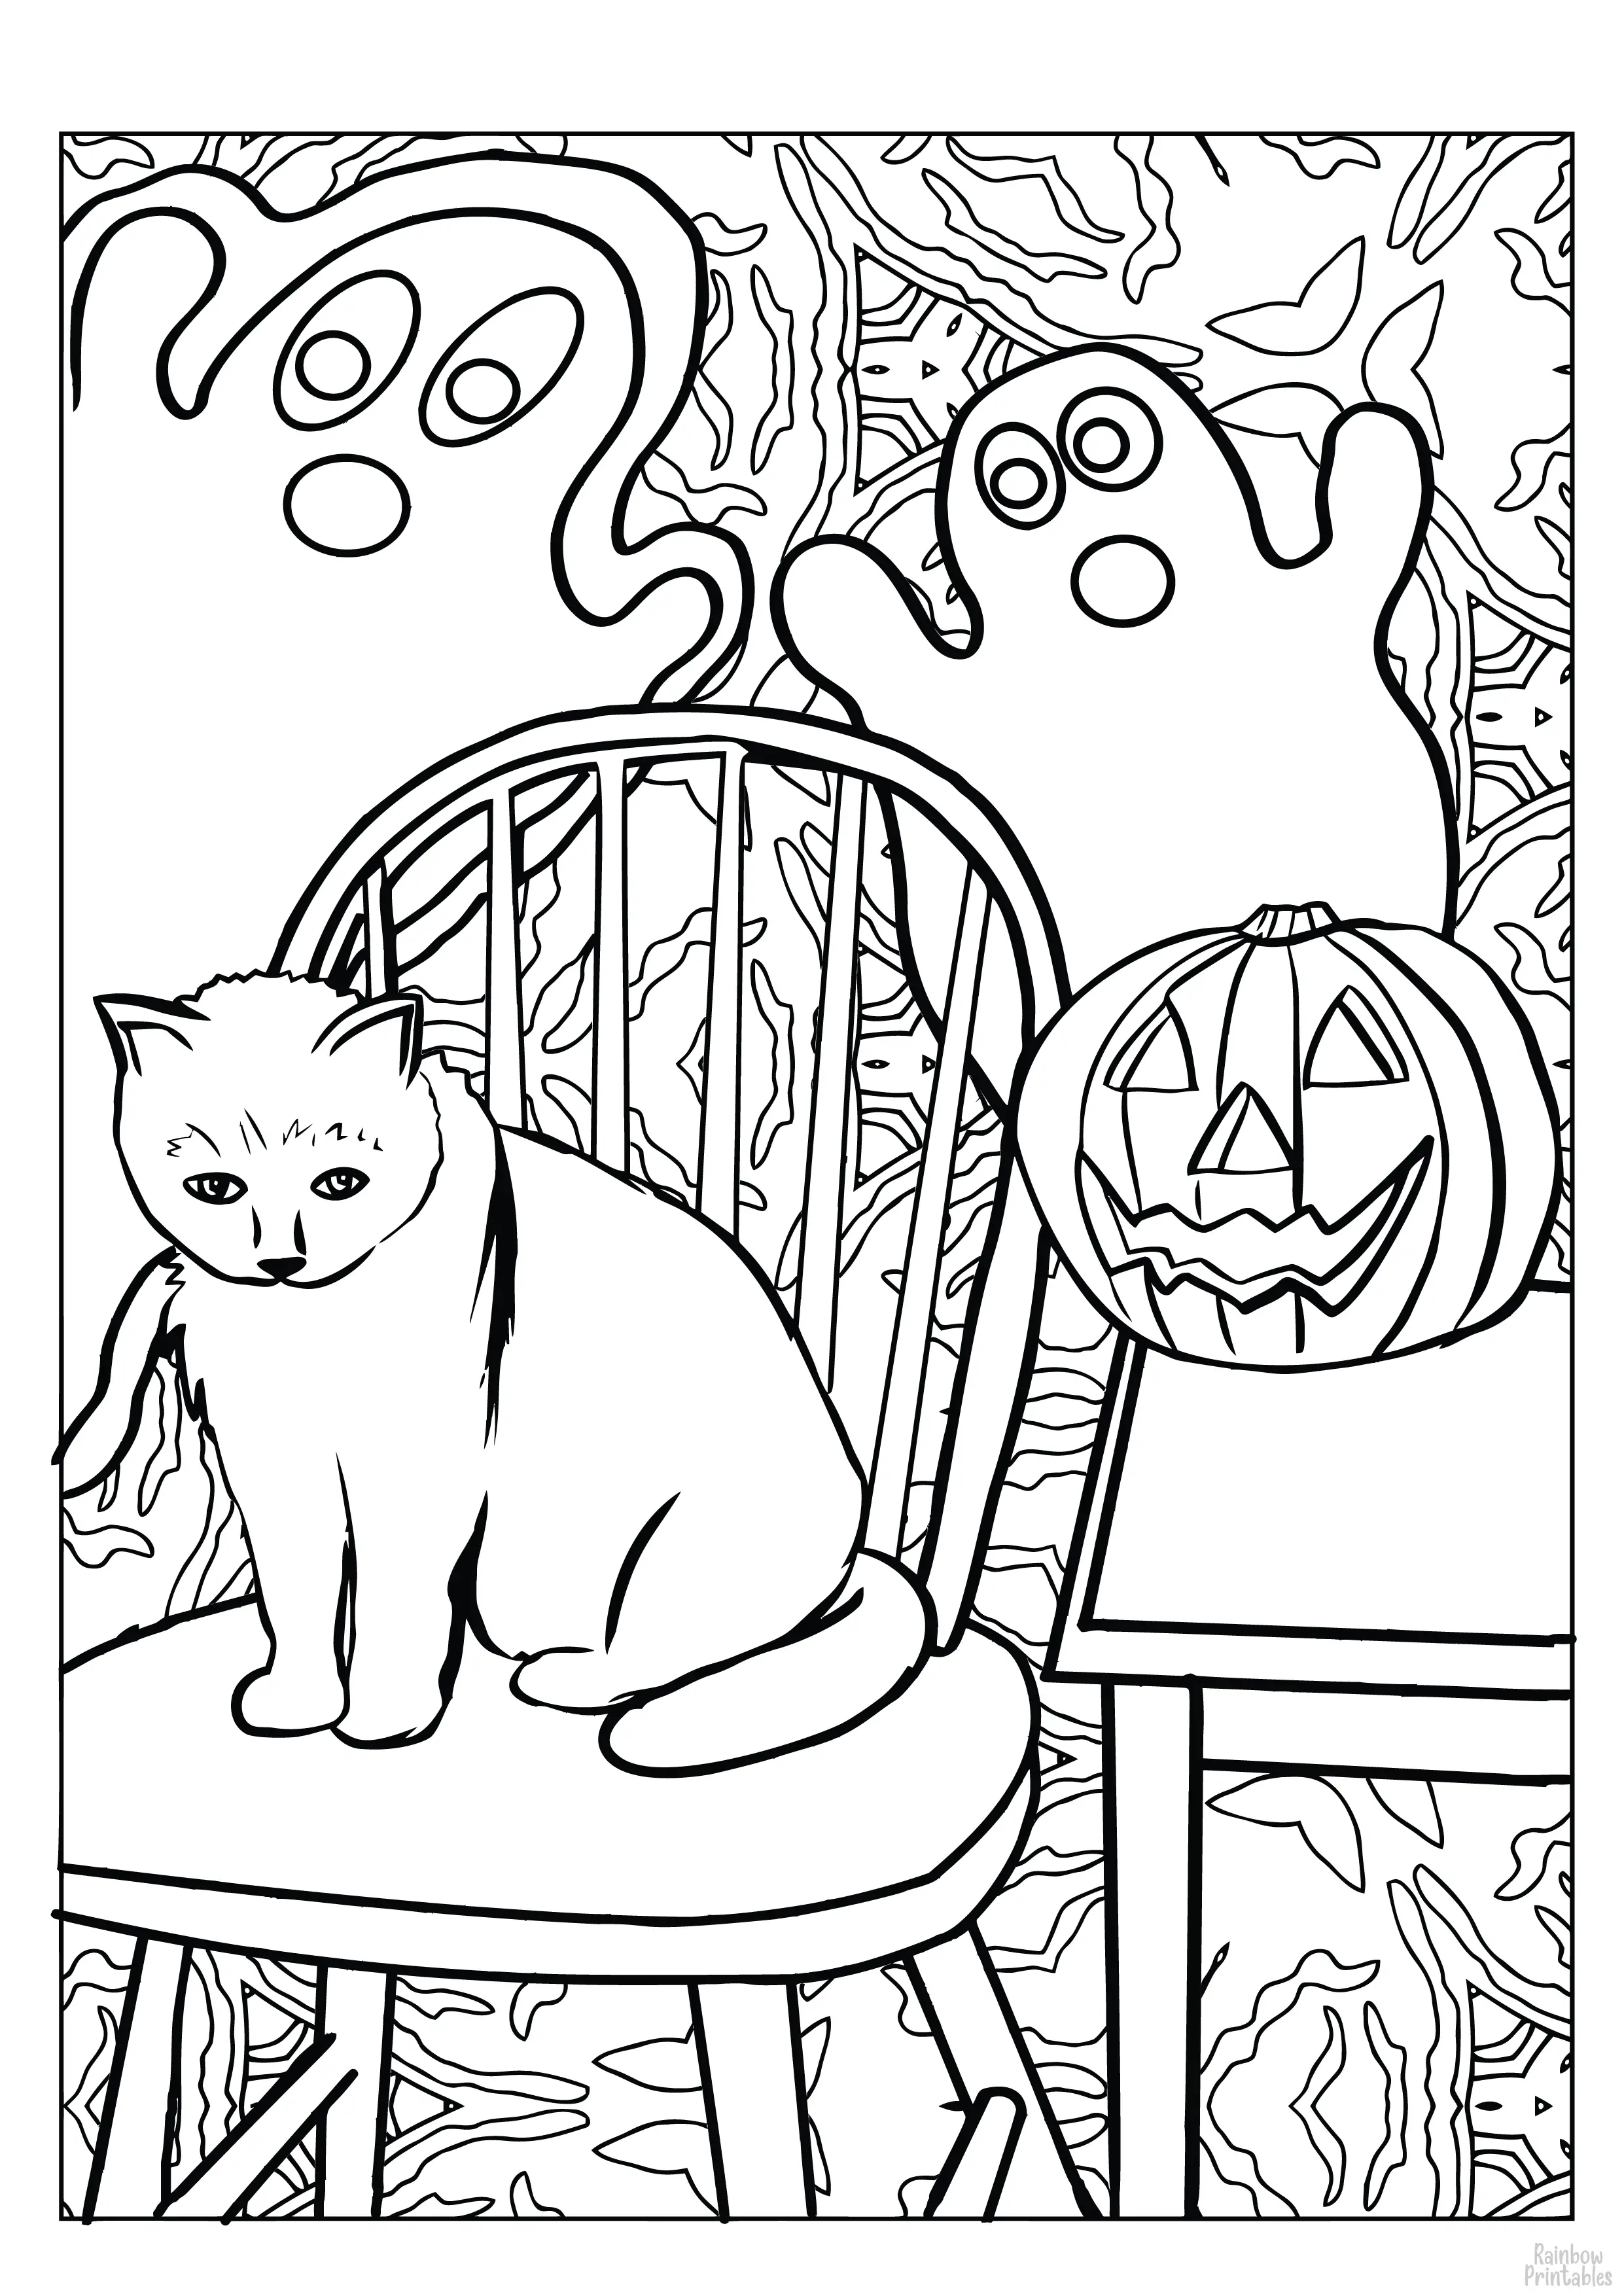 CATS AND GHOSTS MANDALA Line Art Drawing Set Free Activity Coloring Pages for Kids